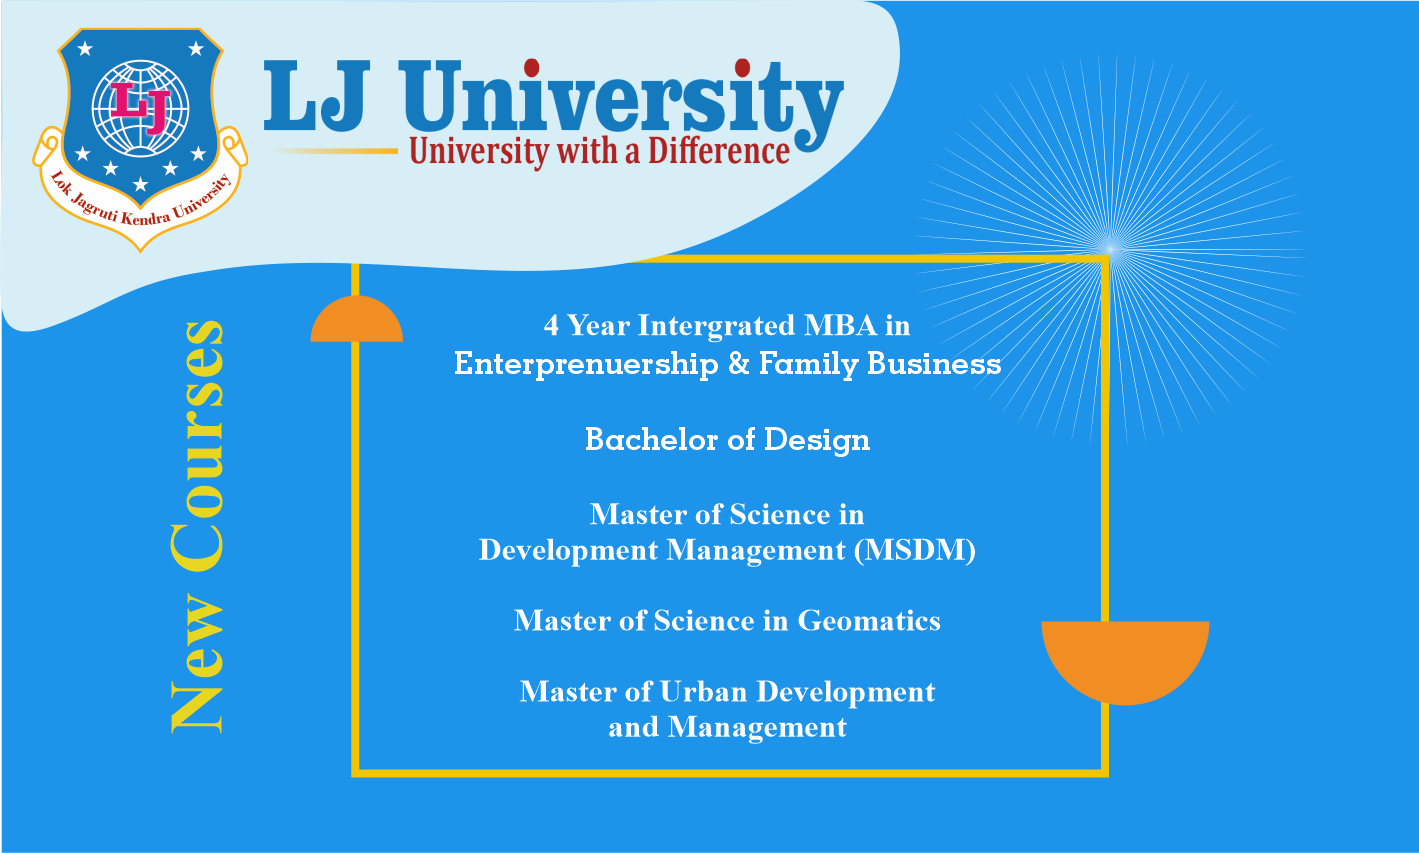 New Course: MS in Development Studies & Management, Master of Science in Geomatics, Master of Urban Development& Management, Bachelor of Design, Integrated MBA in Entrepreneurship & Family Business